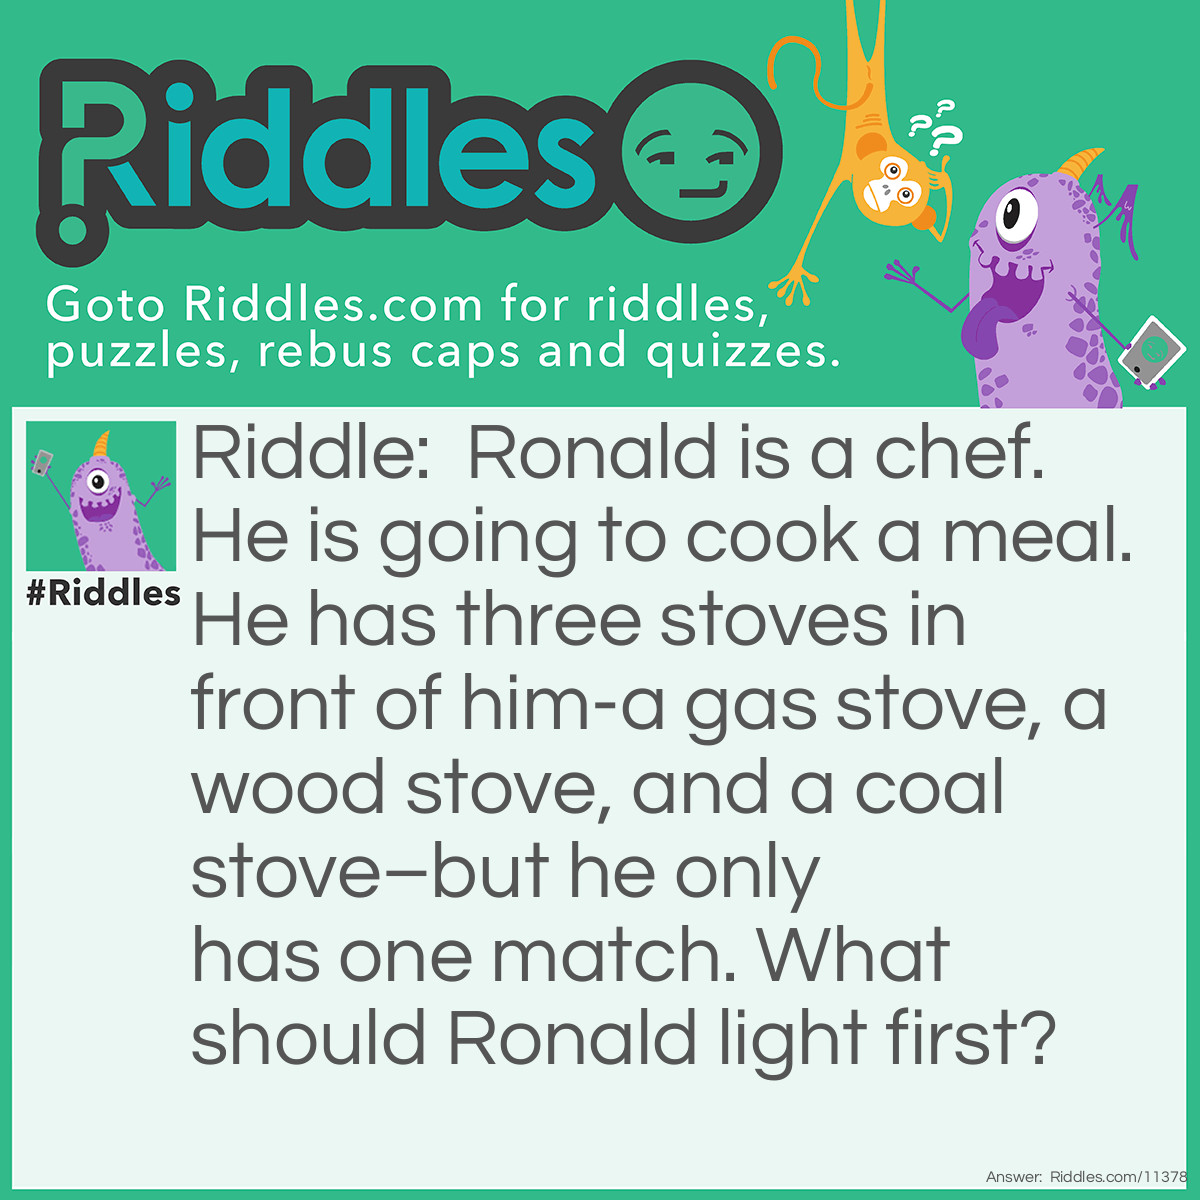 Riddle: Ronald is a chef. He is going to cook a meal. He has three stoves in front of him-a gas stove, a wood stove, and a coal stove–but he only has one match. What should Ronald light first? Answer: Ronald should light the match first because the match needs to be lit up before he can light up anything else. After all, I never said that the match was lit in the first place!